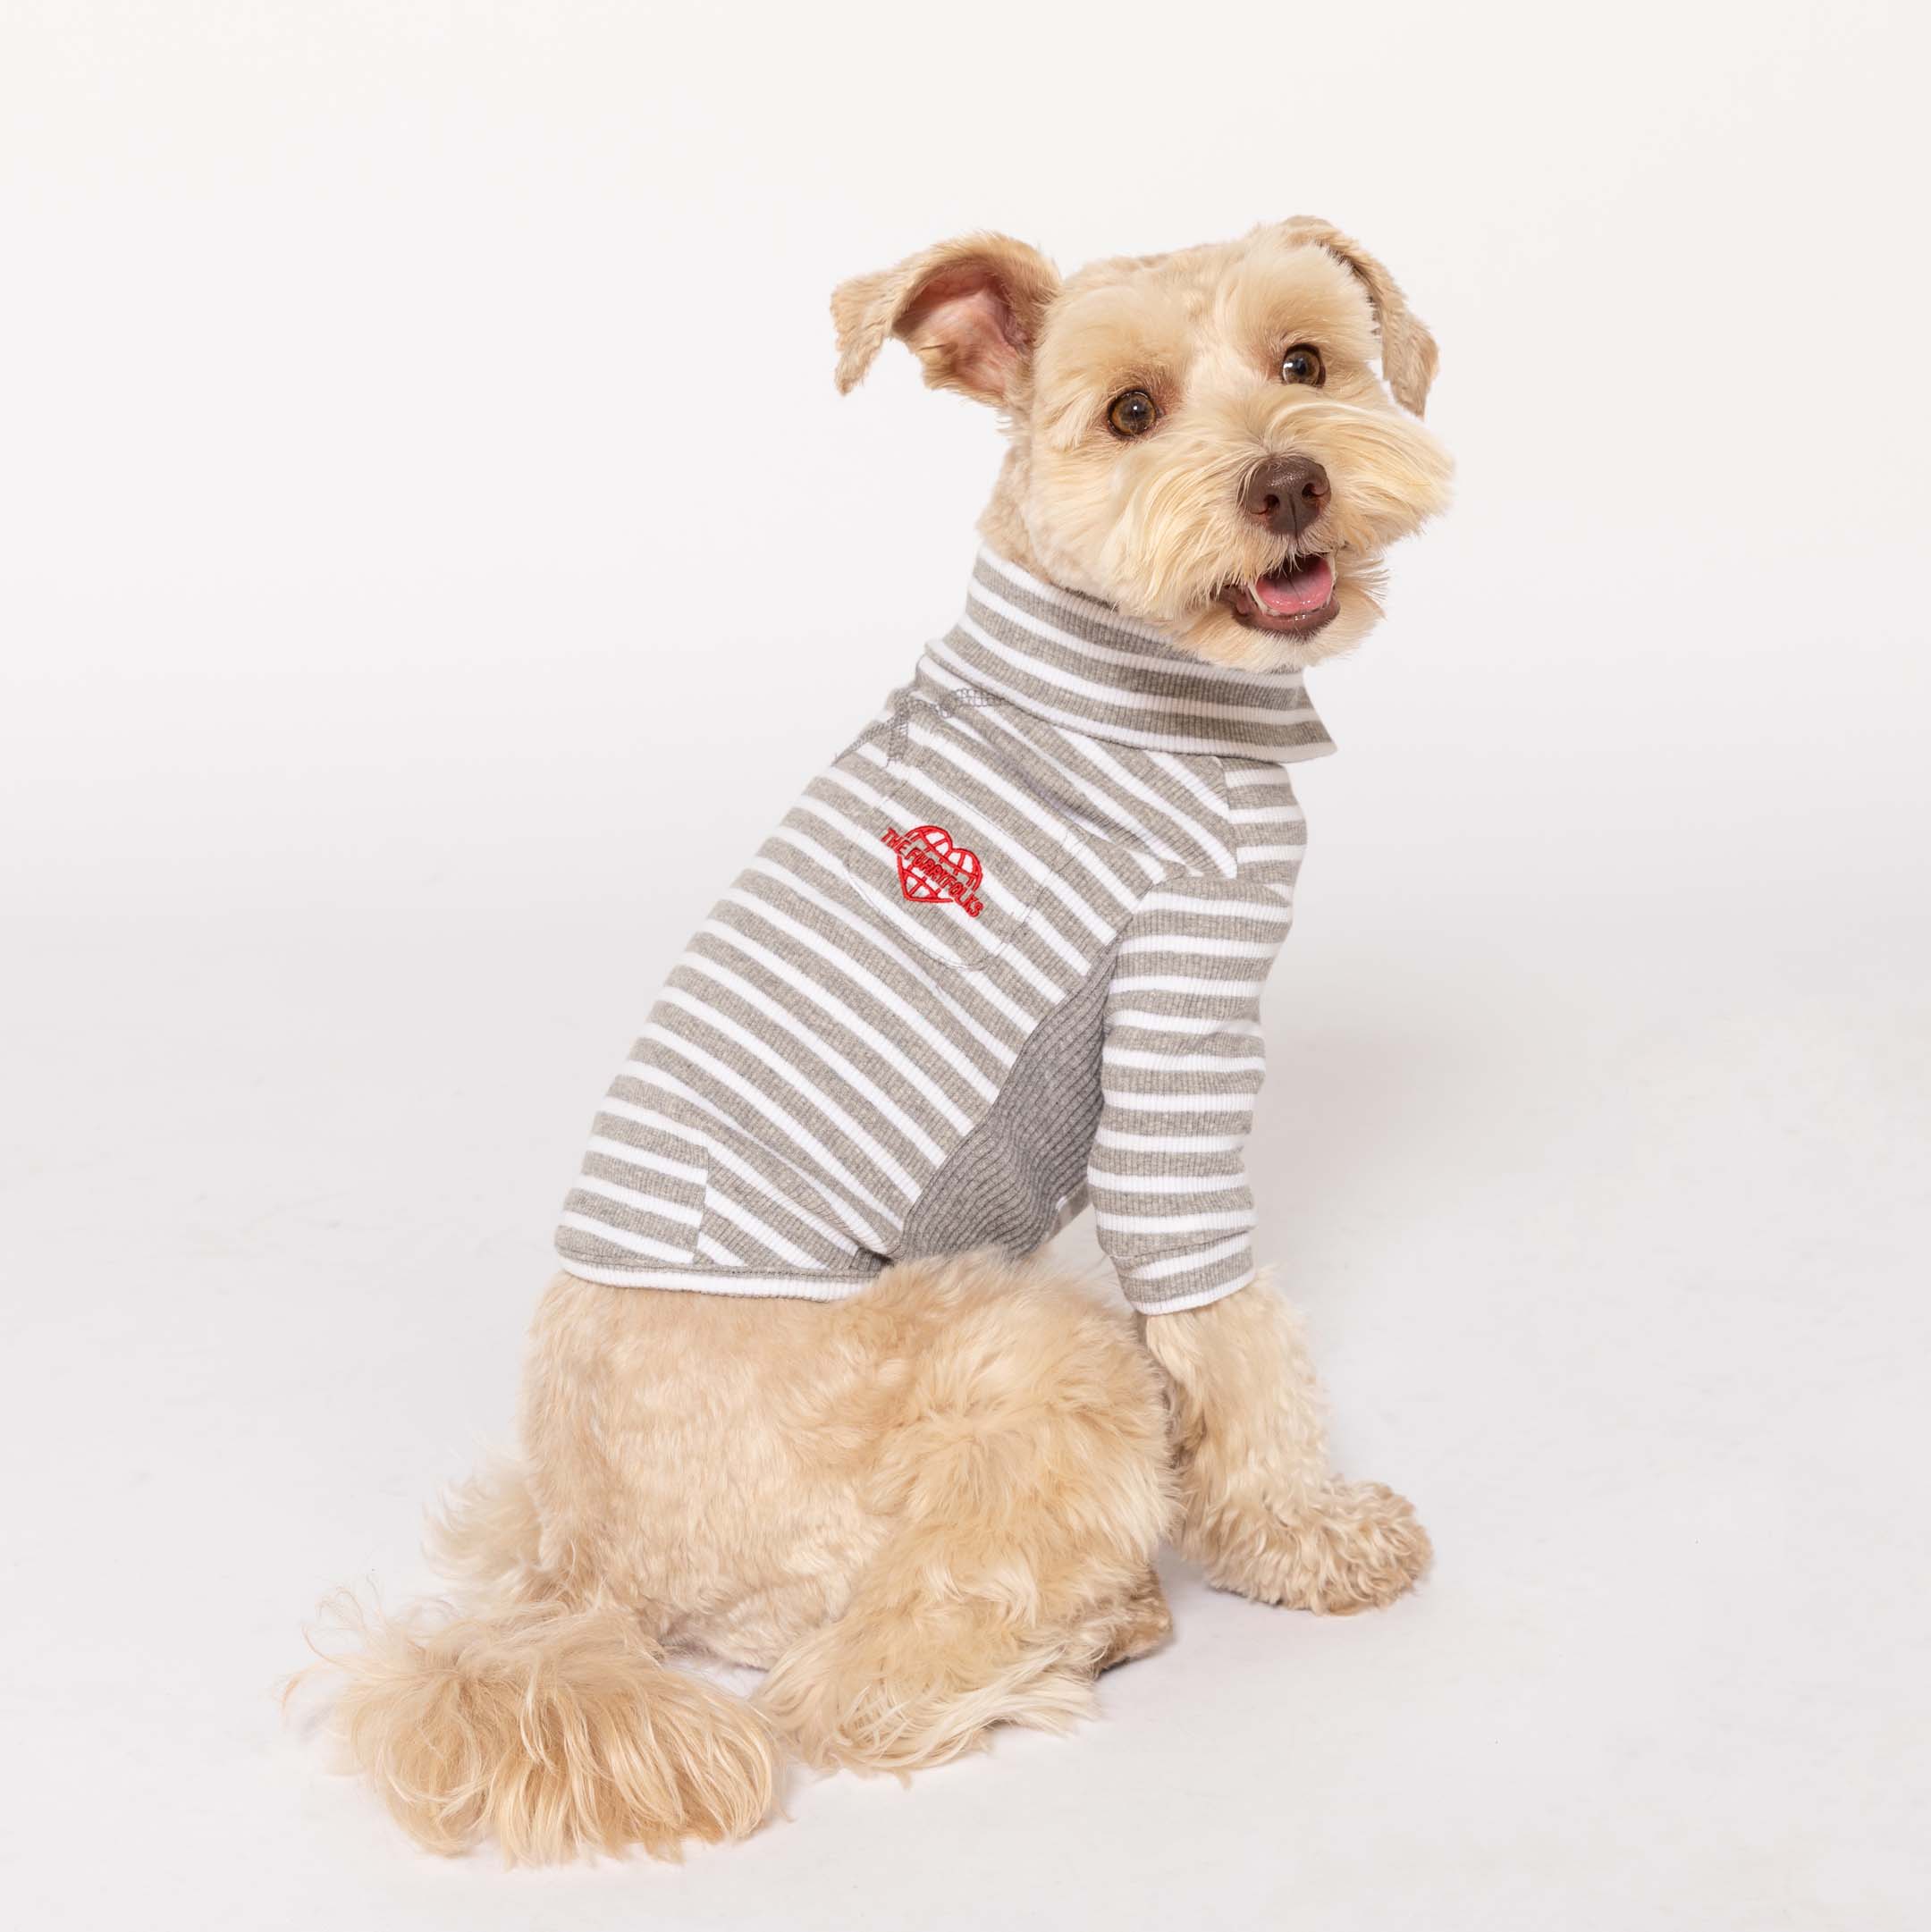 Adorable Schnauzer in a  Heather gray striped turtleneck with a playful heart logo, posing with a cheerful expression.